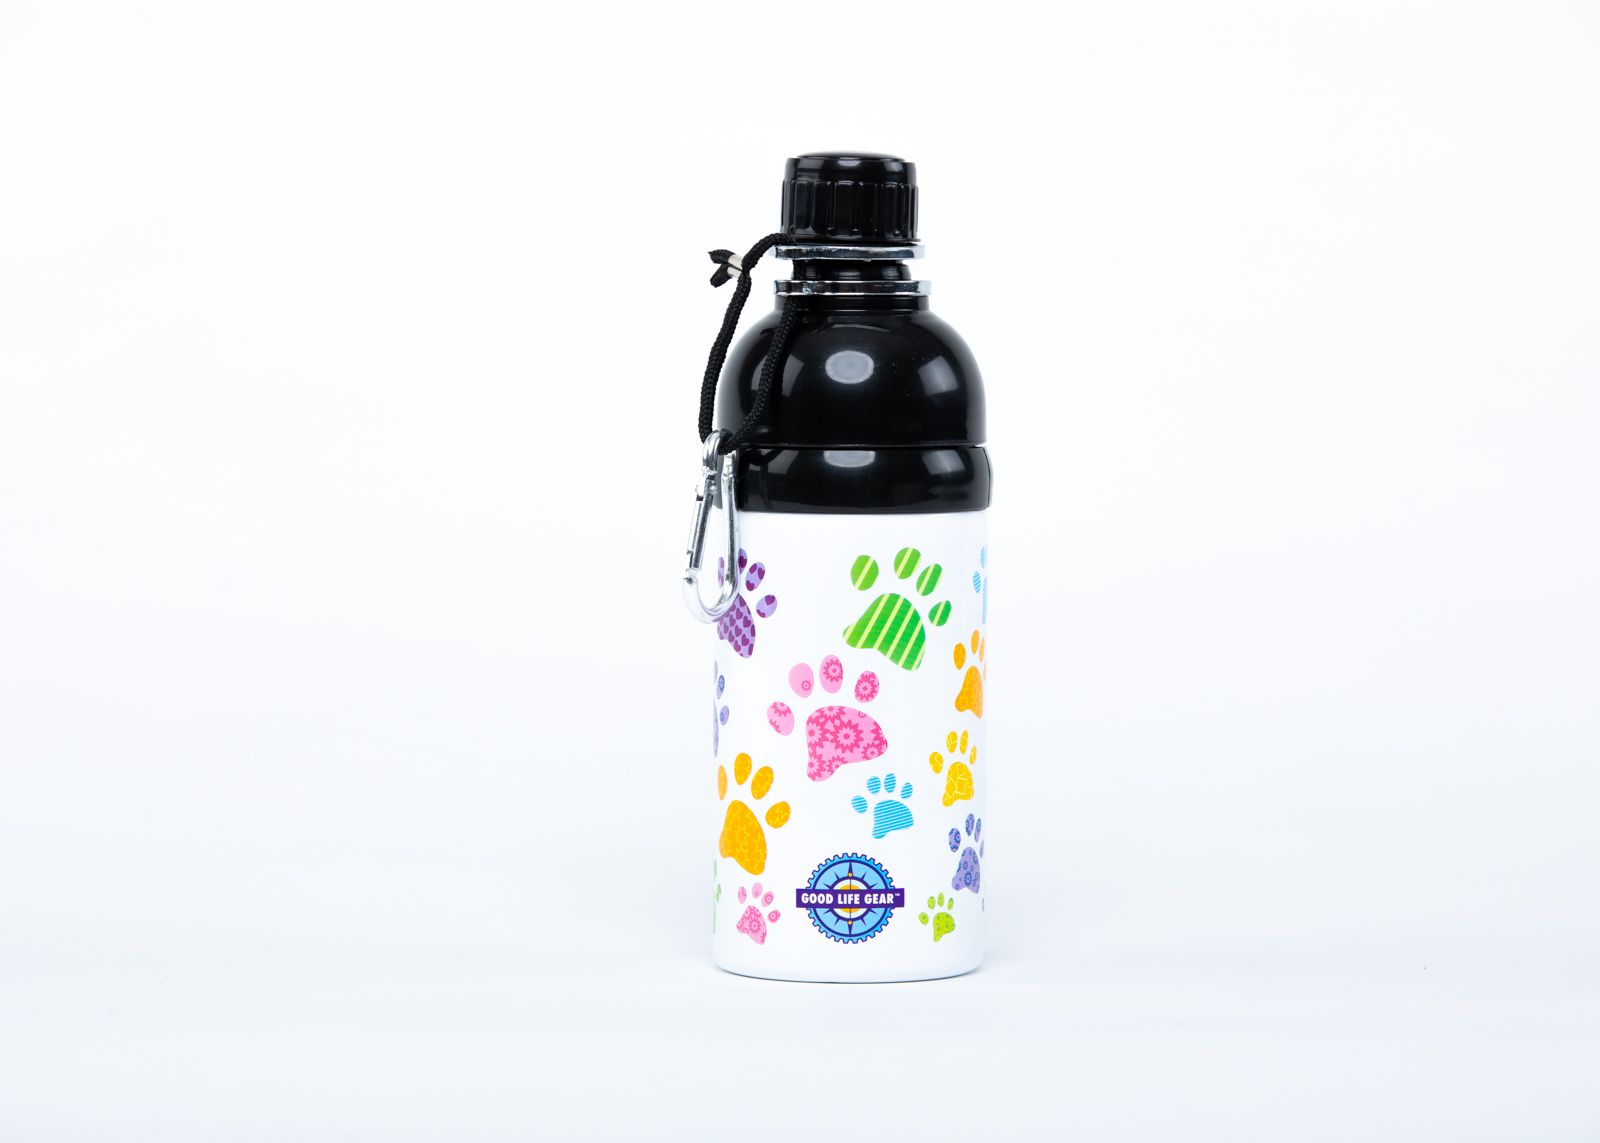 Sf6035-5pw 16 Oz. Stainless Steel Pet Water Bottle With Carabineer - Puppy Paws